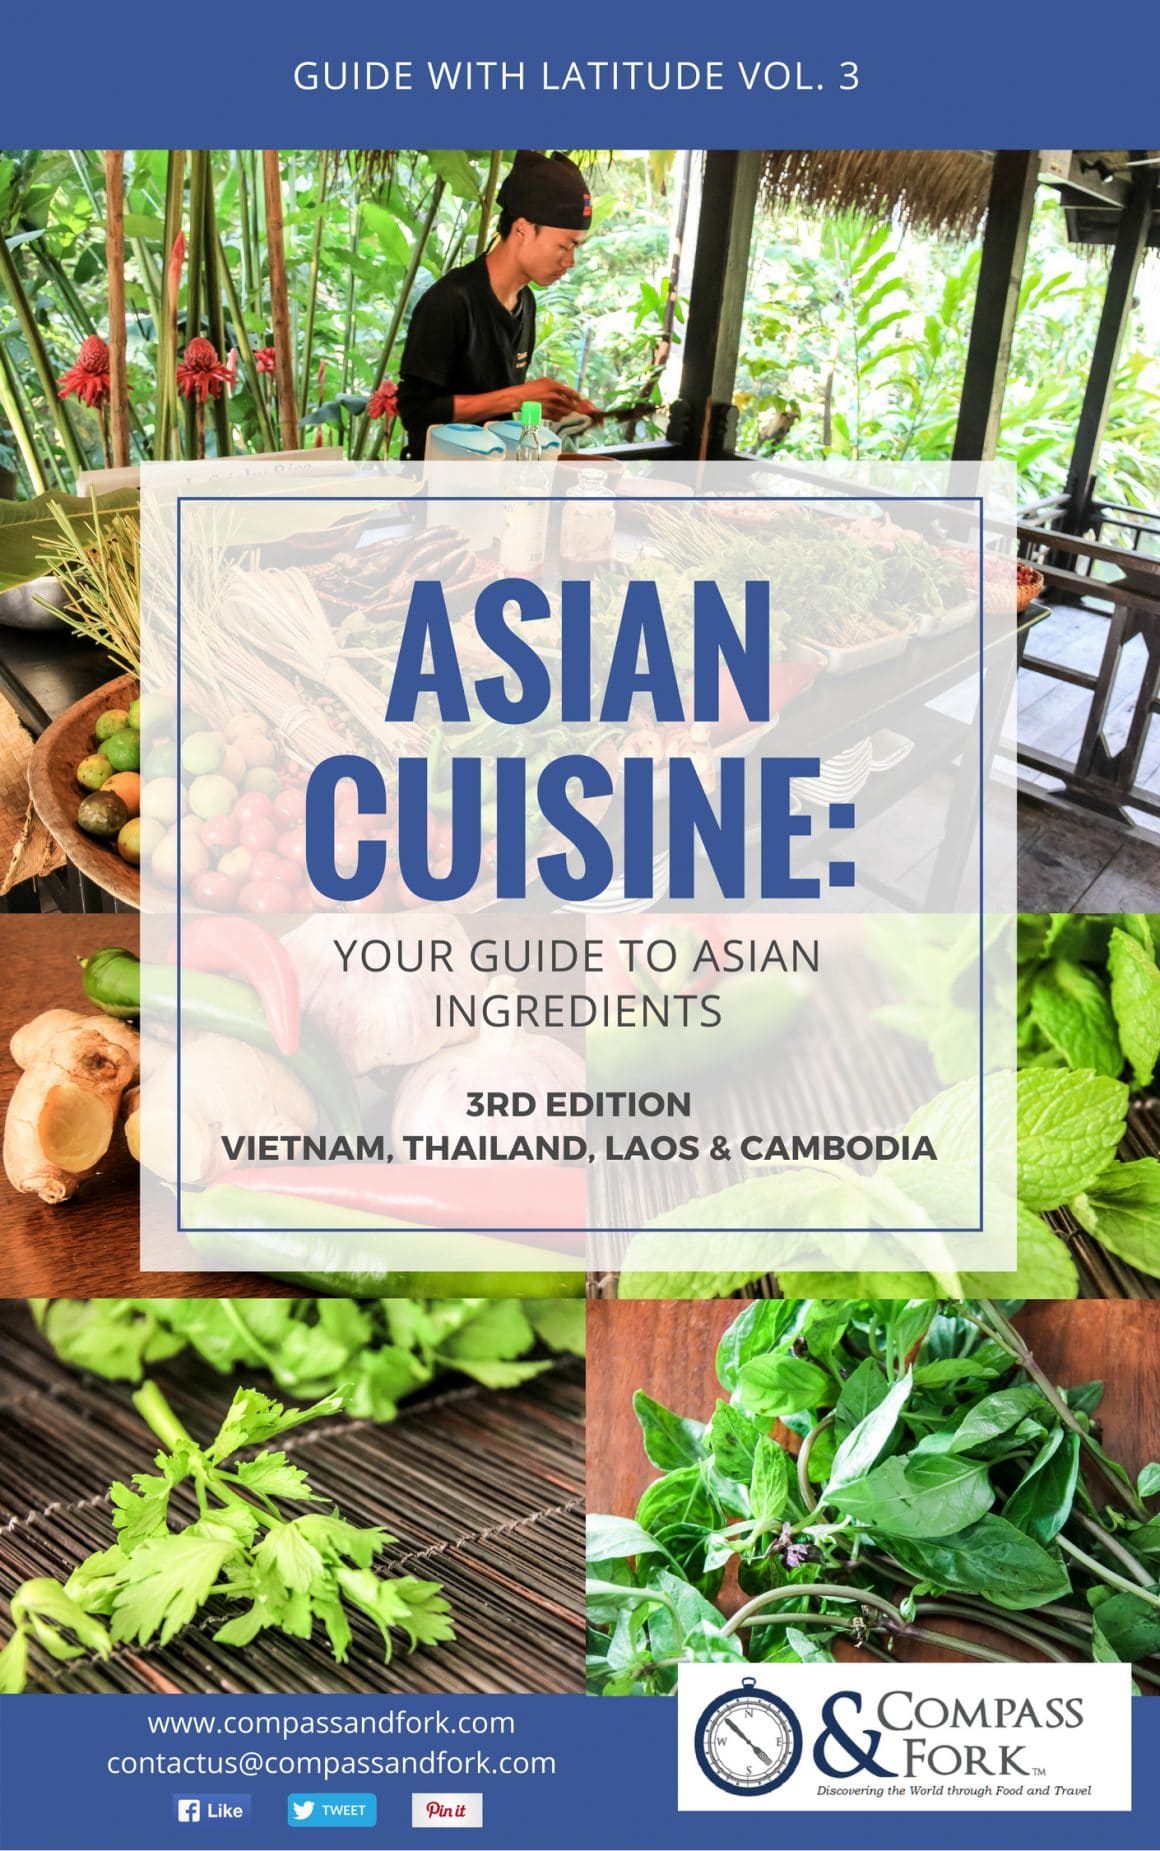 ASIAN CUISINE: GUIDE TO ASIAN INGREDIENTS